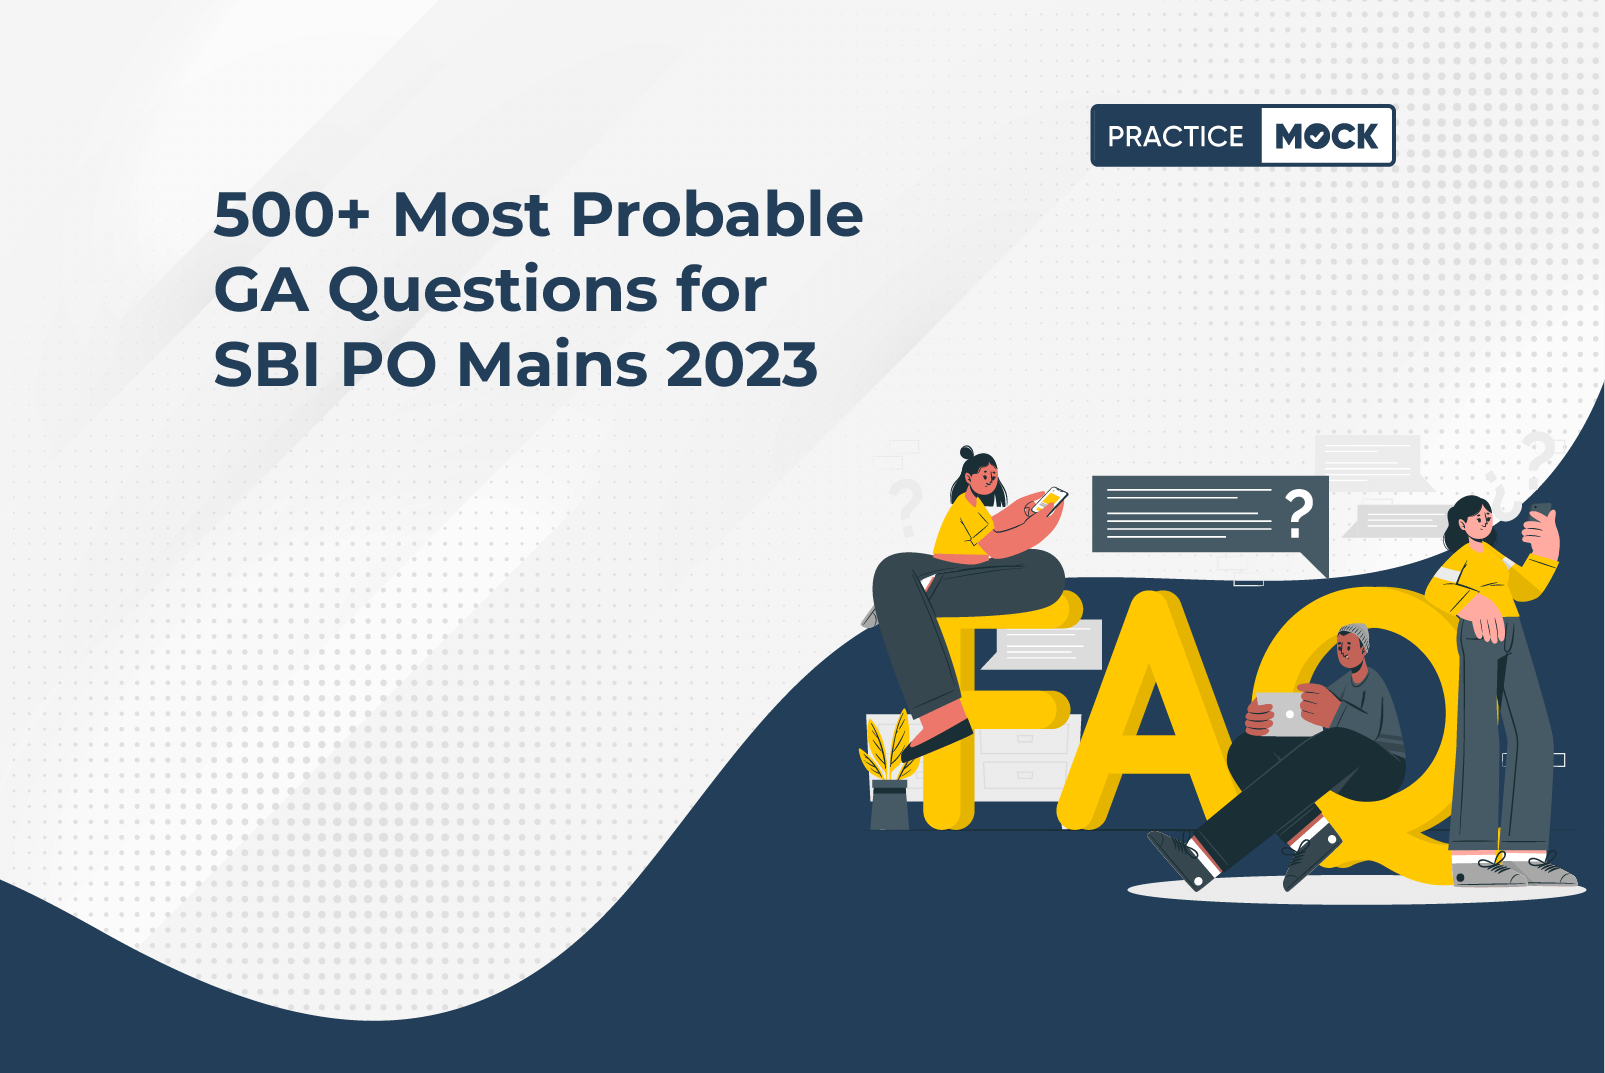 500+ Most Probable GA Questions for SBI PO Mains 2023